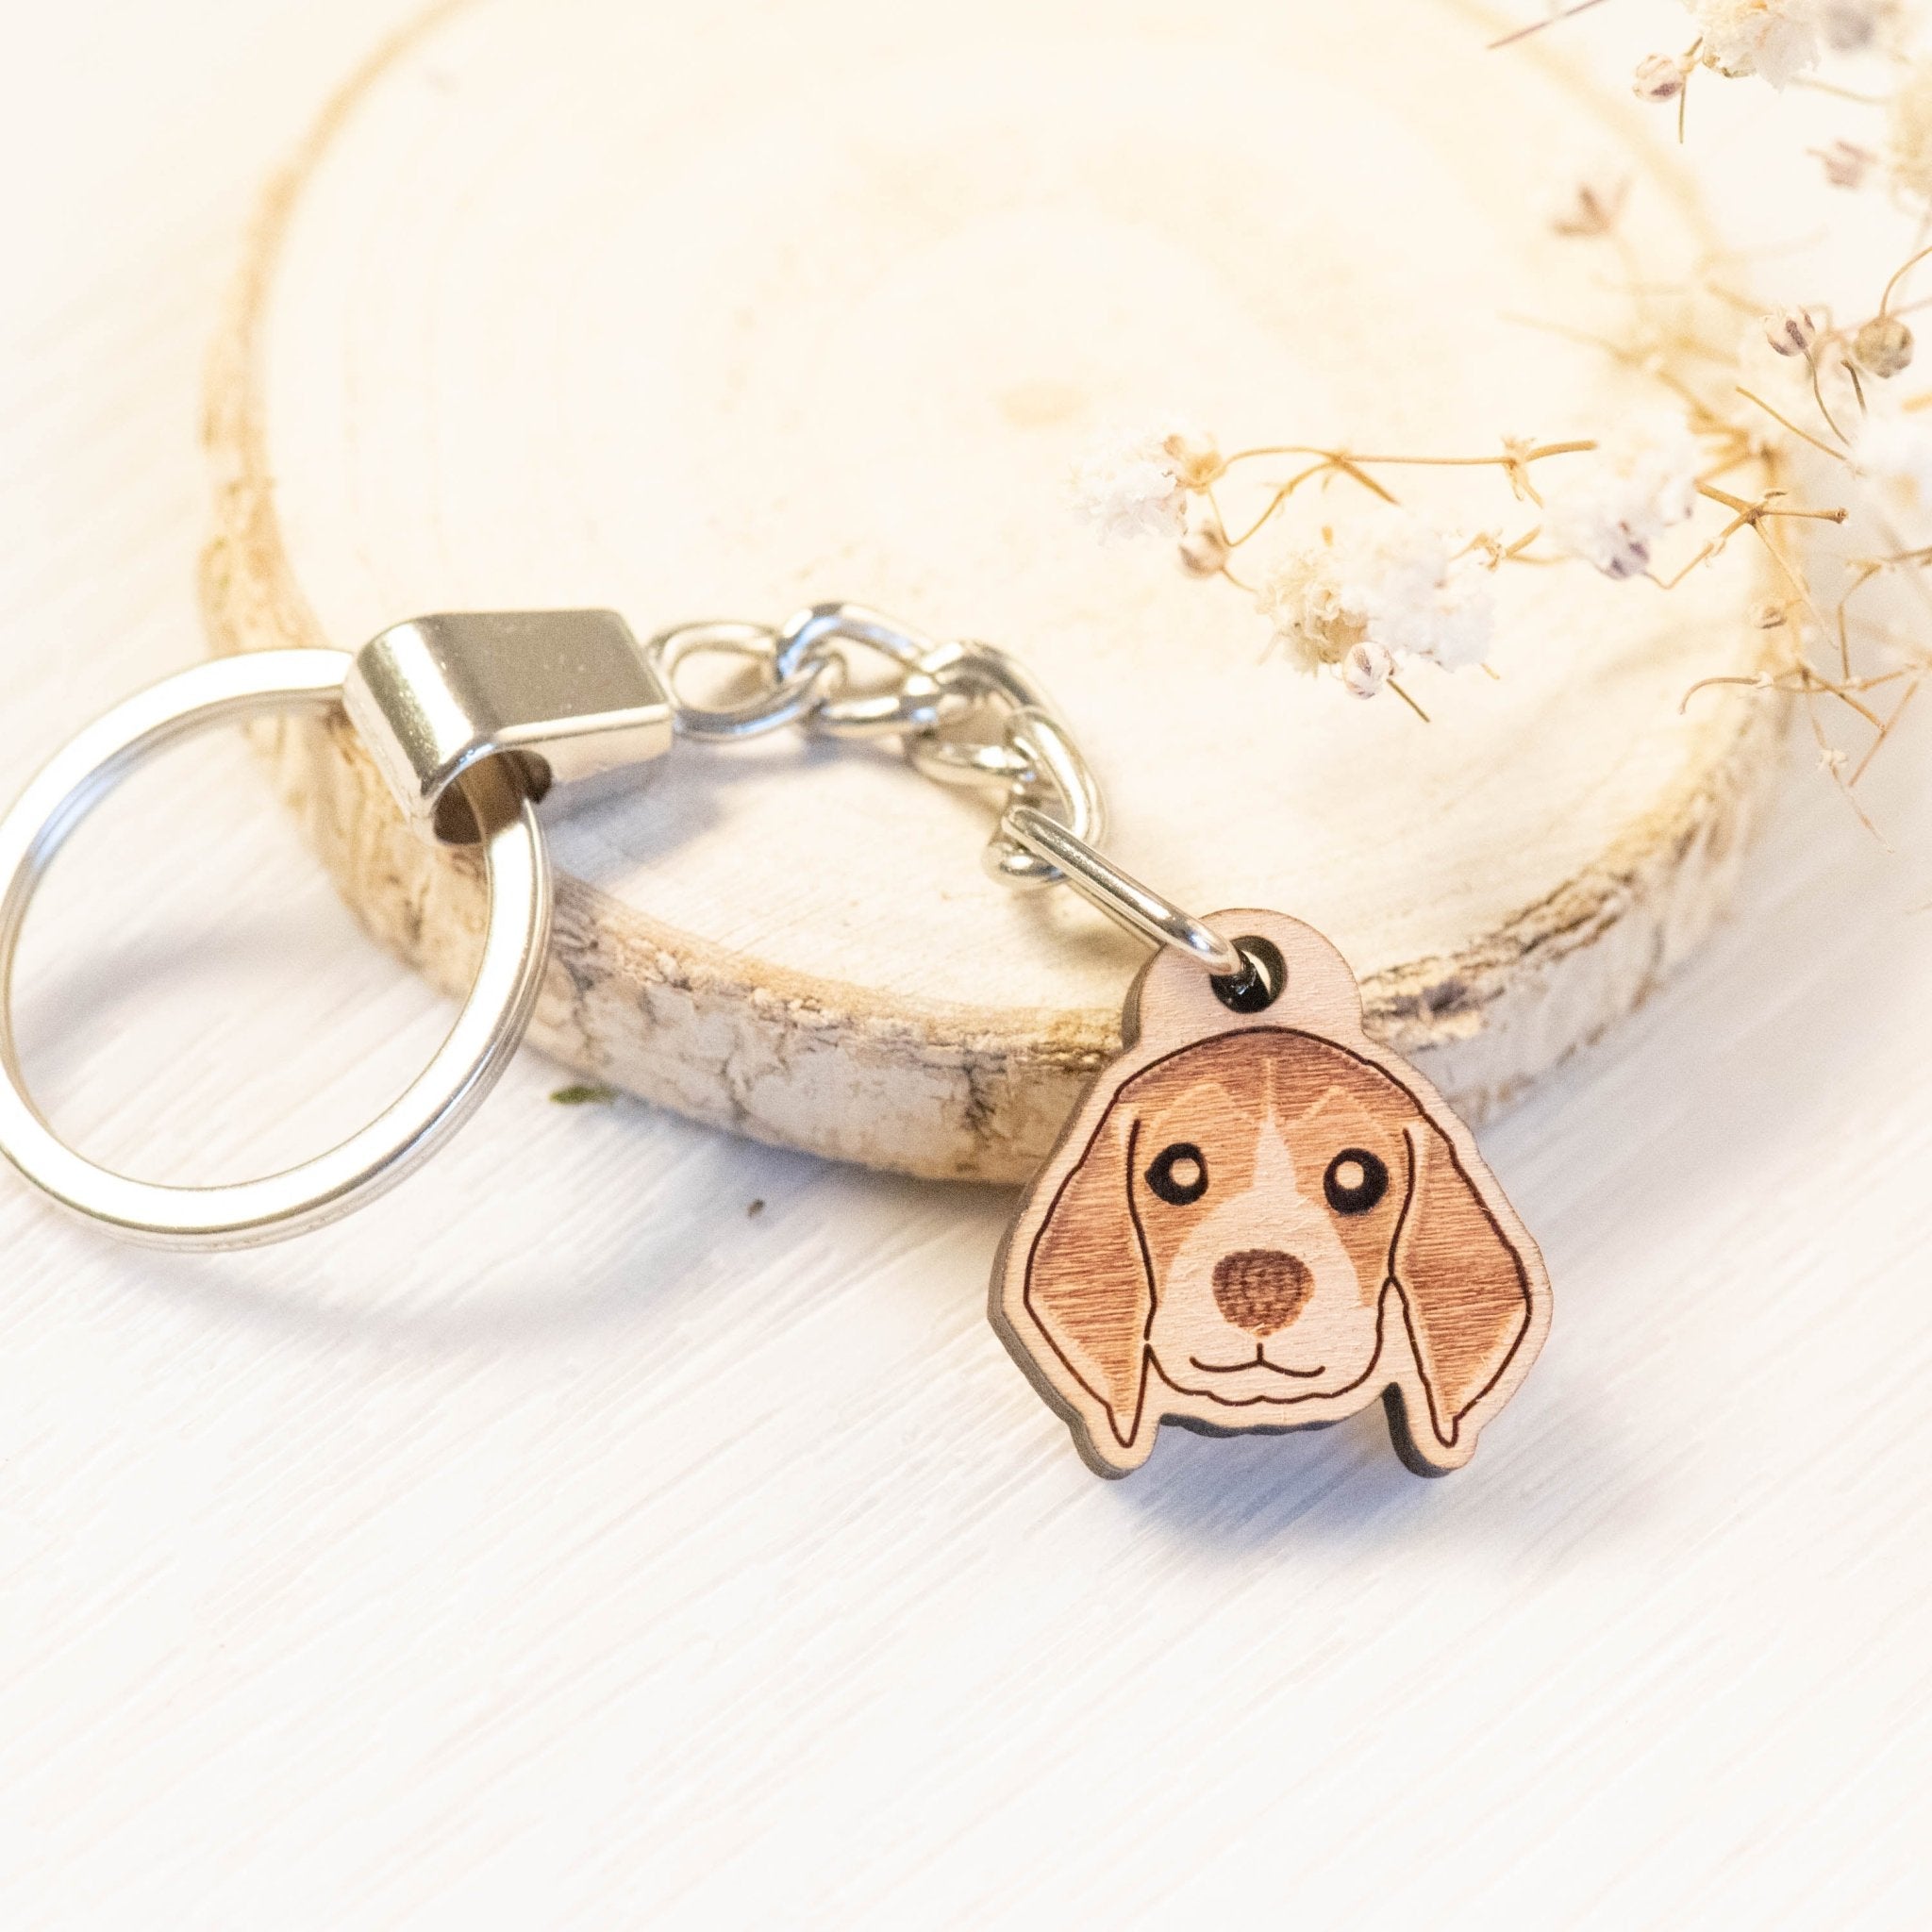 Beagle Dog Earrings - EL10162 - Robin Valley Official Store